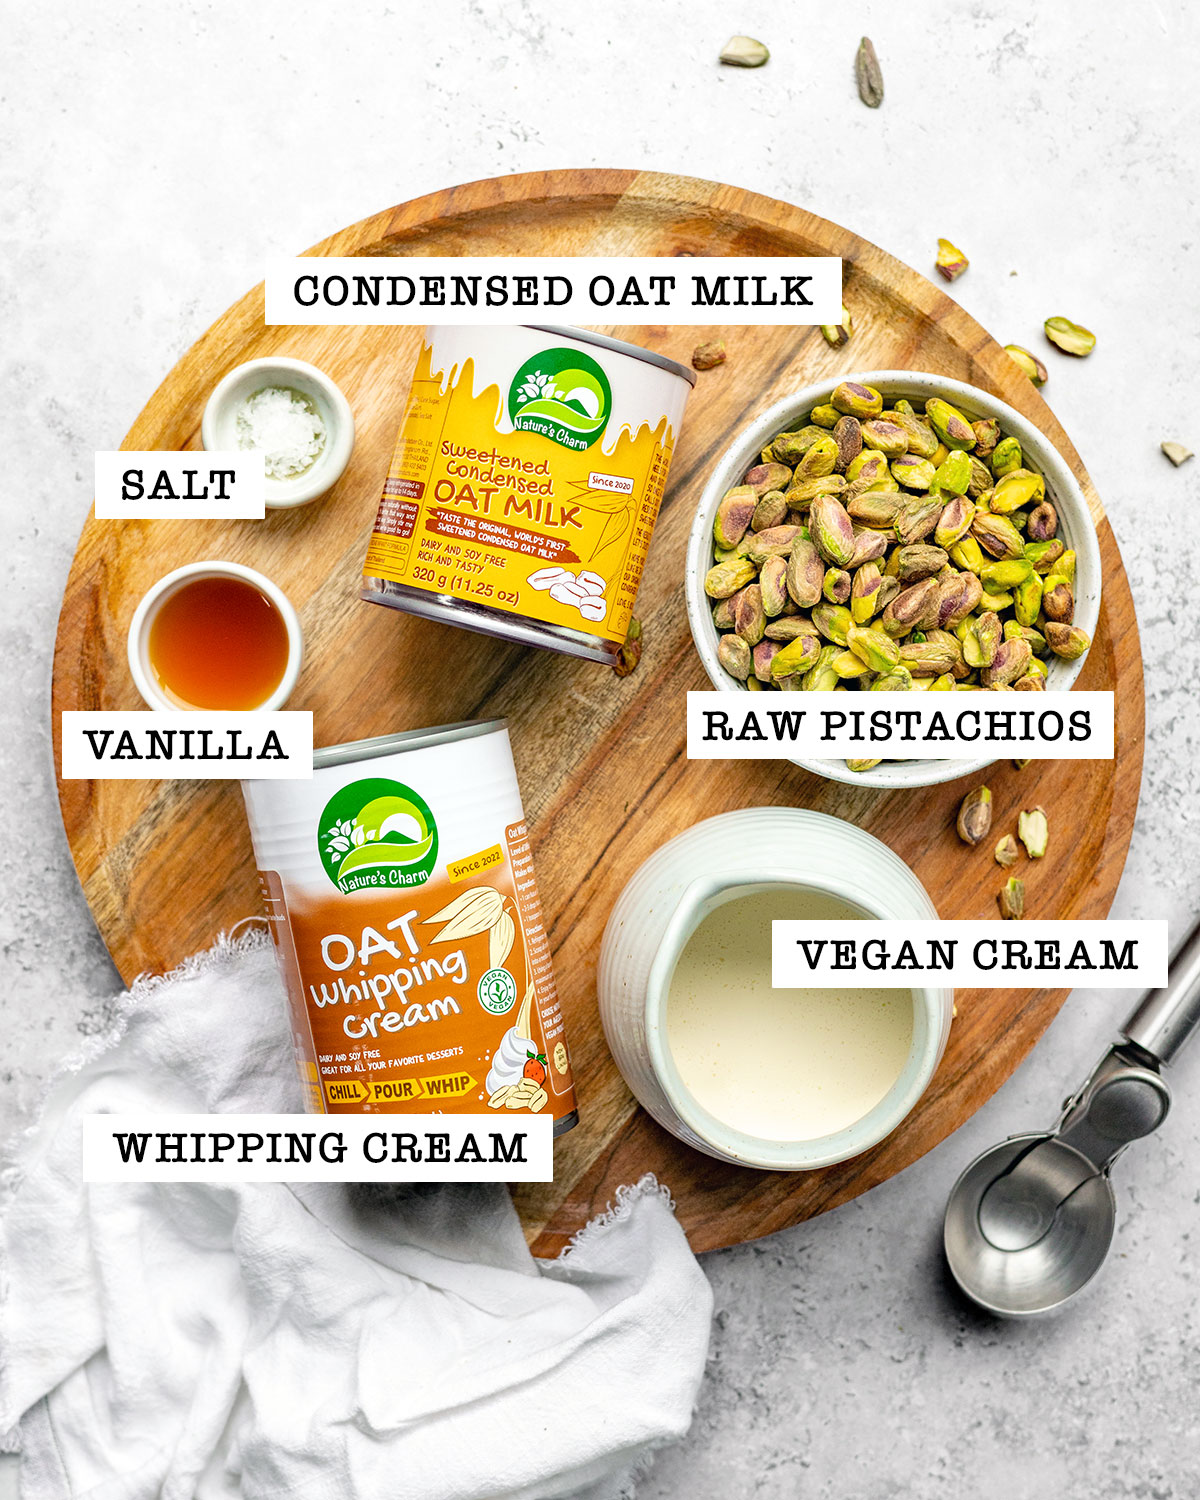 Ingredients for vegan pistachio ice cream on a board with labels.